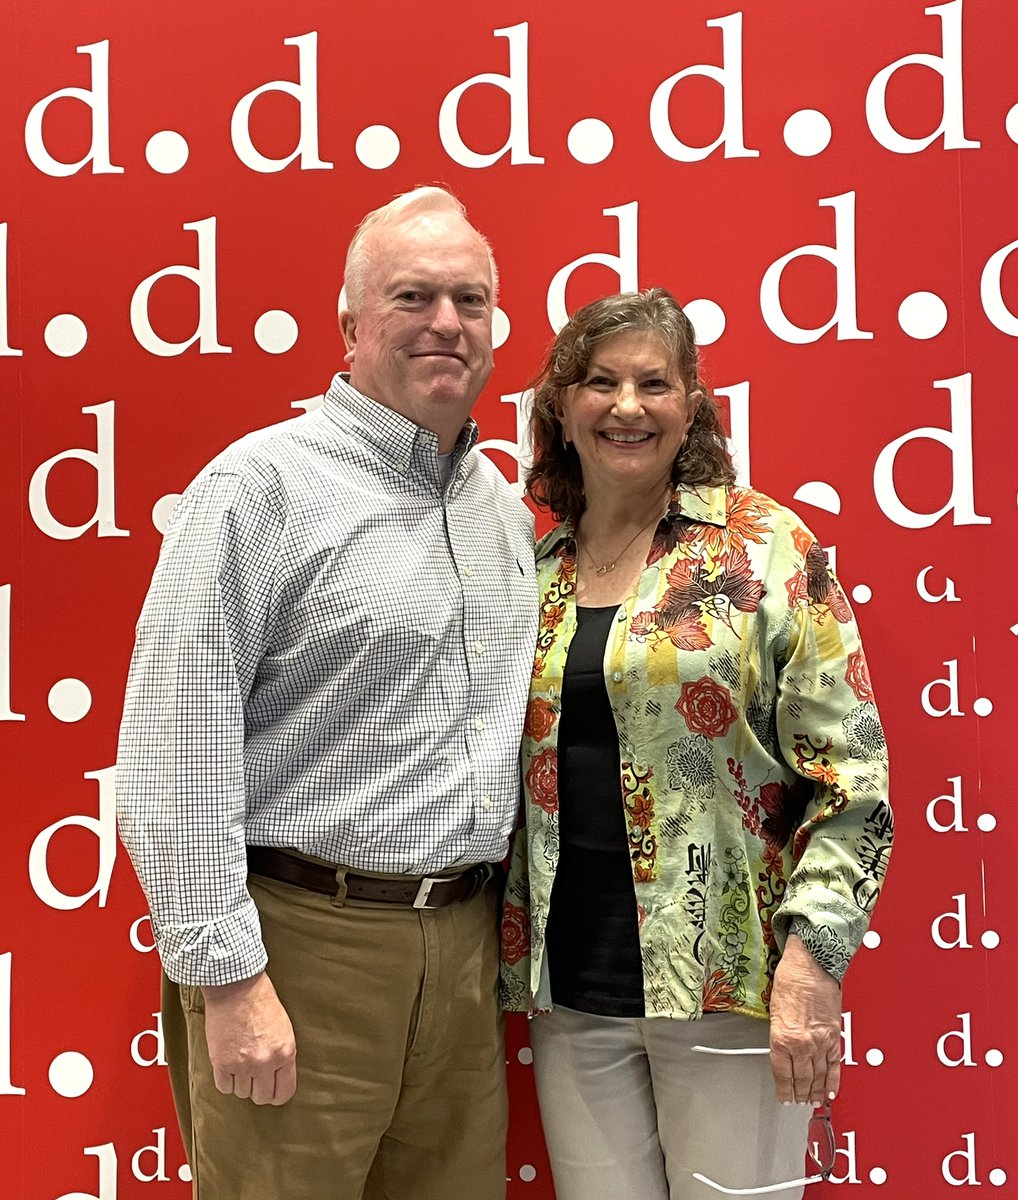 WRAP’s Kurt Erickson today in Washington, D.C. with @wesavelivesorg’s (and @MADDNational founder) Candance Lightner (@CandyLightner1) at @DMOIDC’s Highway Safety Office’s Safe Communities meeting. @DCVisionZero 🚦 #DriveSober #CrashNotAccident dmoi.dc.gov/page/vision-ze…